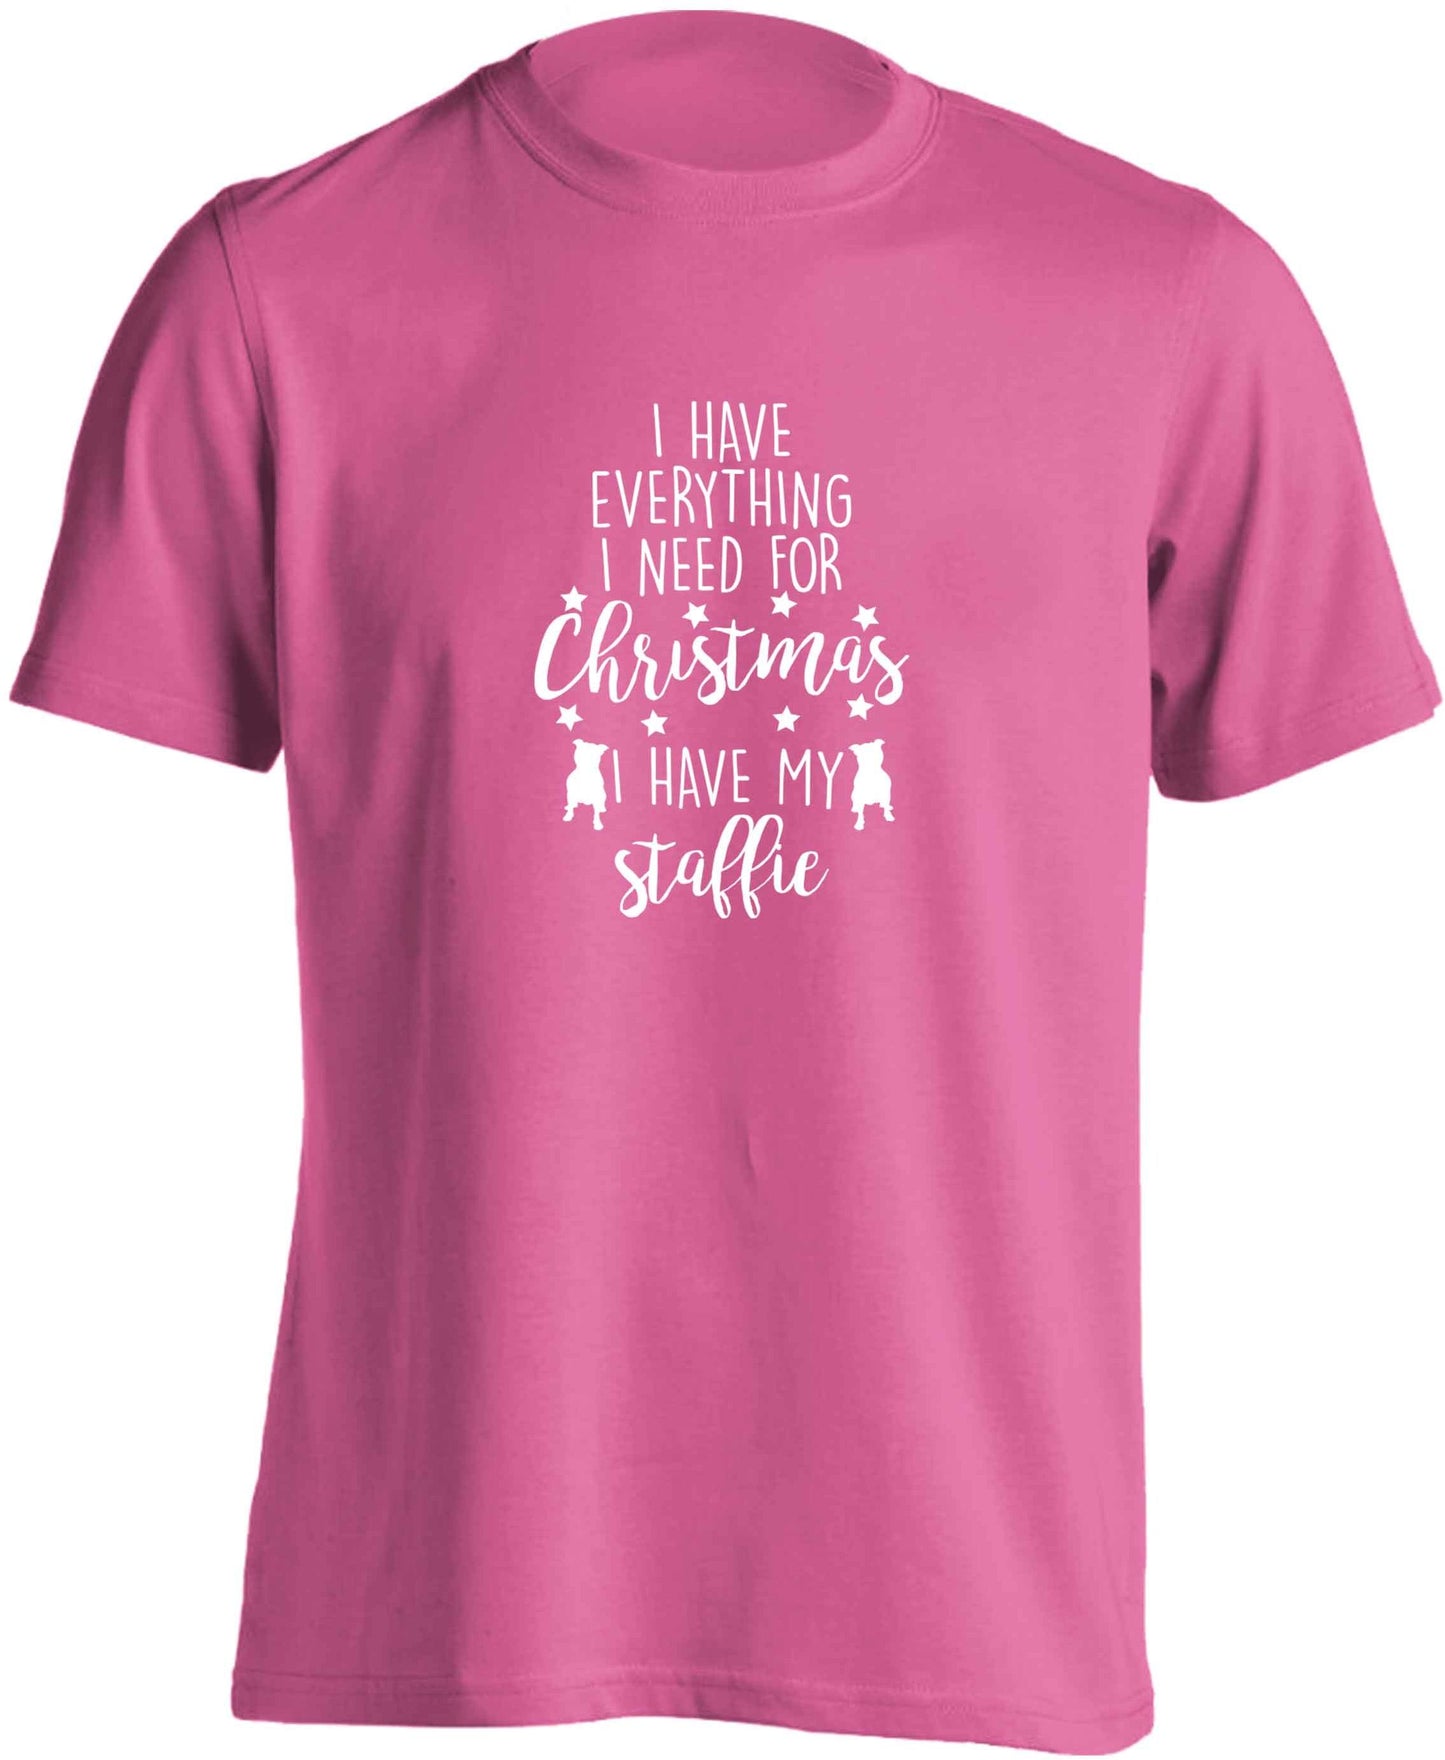 I have everything I need for Christmas I have my staffie adults unisex pink Tshirt 2XL